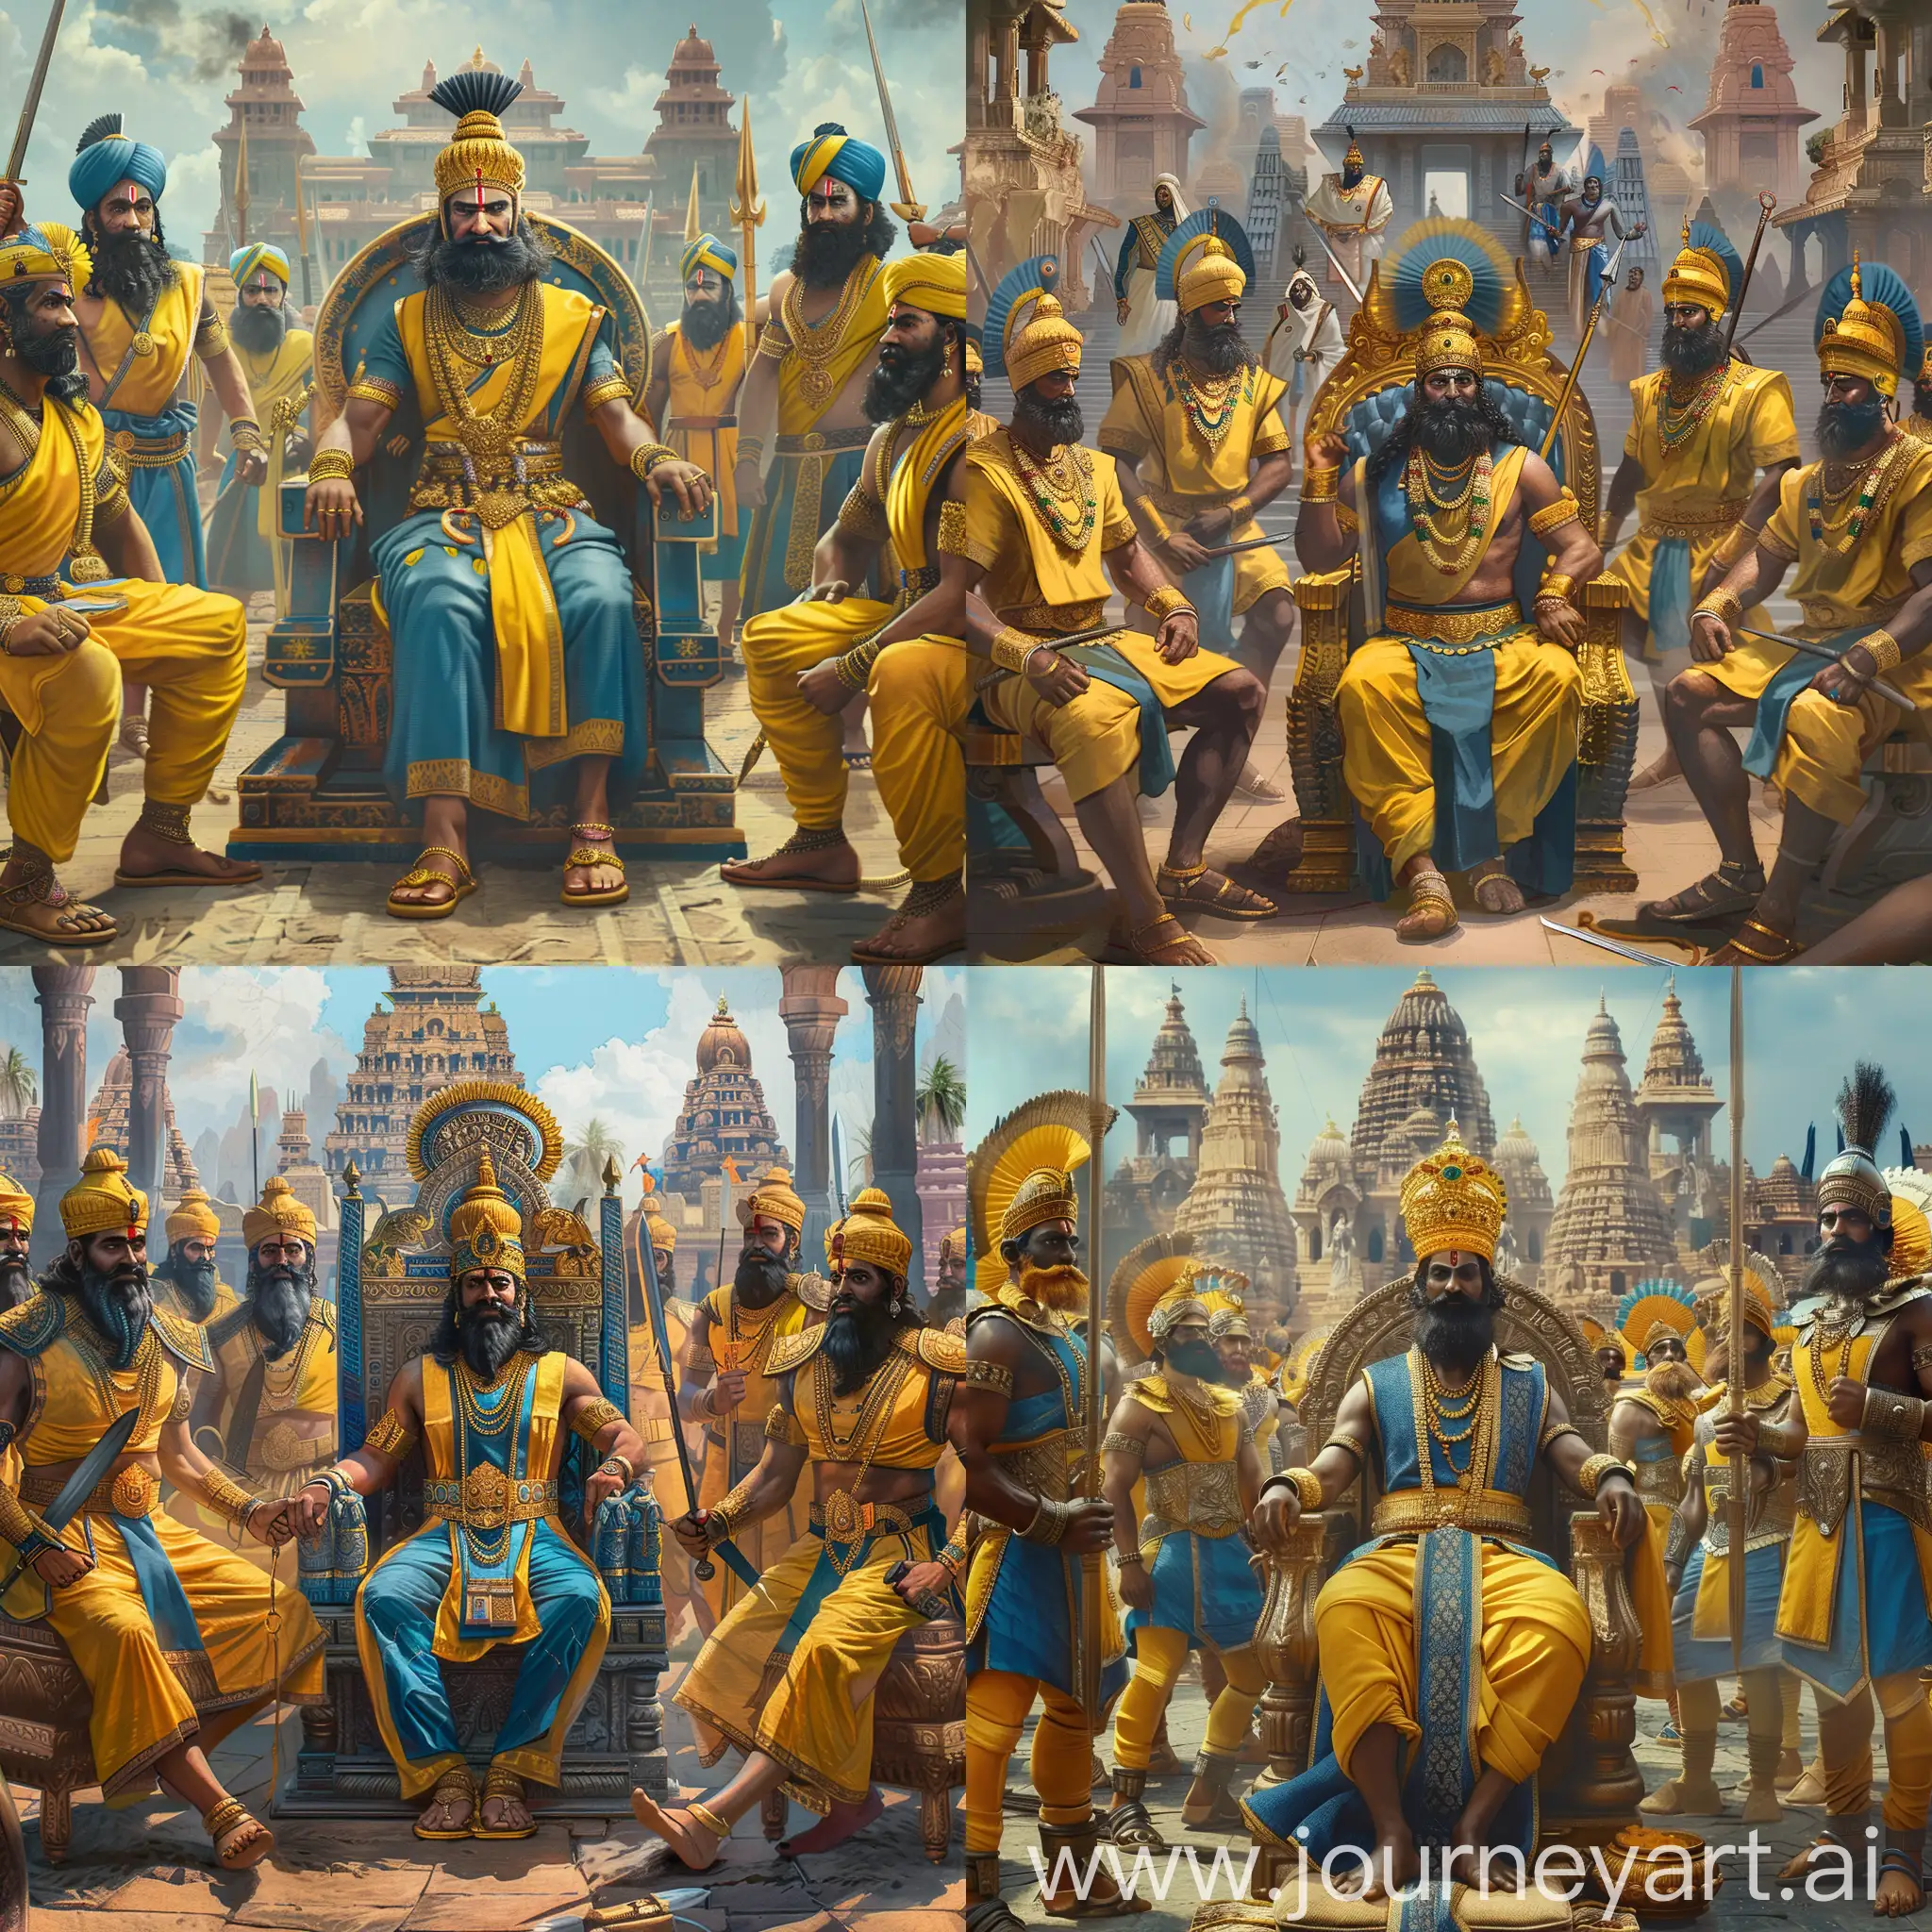 a middle-aged ancient South Indian Chola Dynasty king is sitting on his imperial throne in the middle, he has black Indian style beard, yellow-blue ancient indian crown and costume, with slippers on foot,

other South Indian Chola Dynasty warriors are in yellow and blue color armor, they hold swords or spears in hands, they have South Indian Chola Dynasty hat and black beard, they stand around the king, with slippers with foot,

they are all before an ancient Hindu palace, other ancient Hindu temples as background,